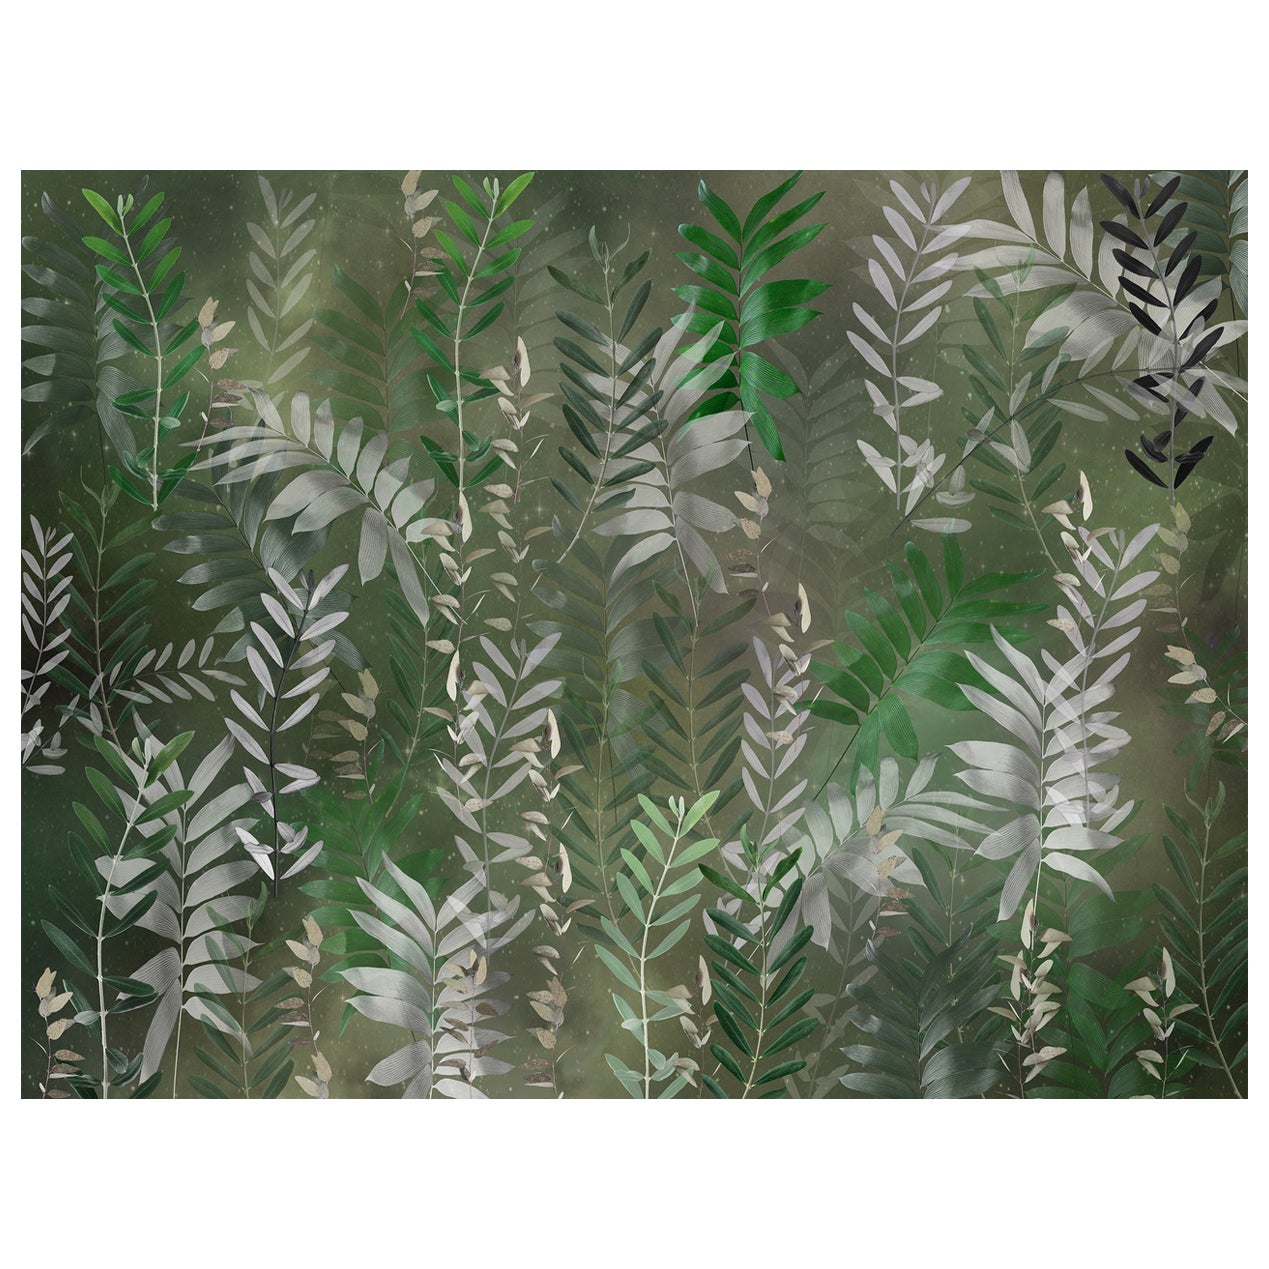 Collections EDGE - Impression murale Ferngully Evergreen en vente